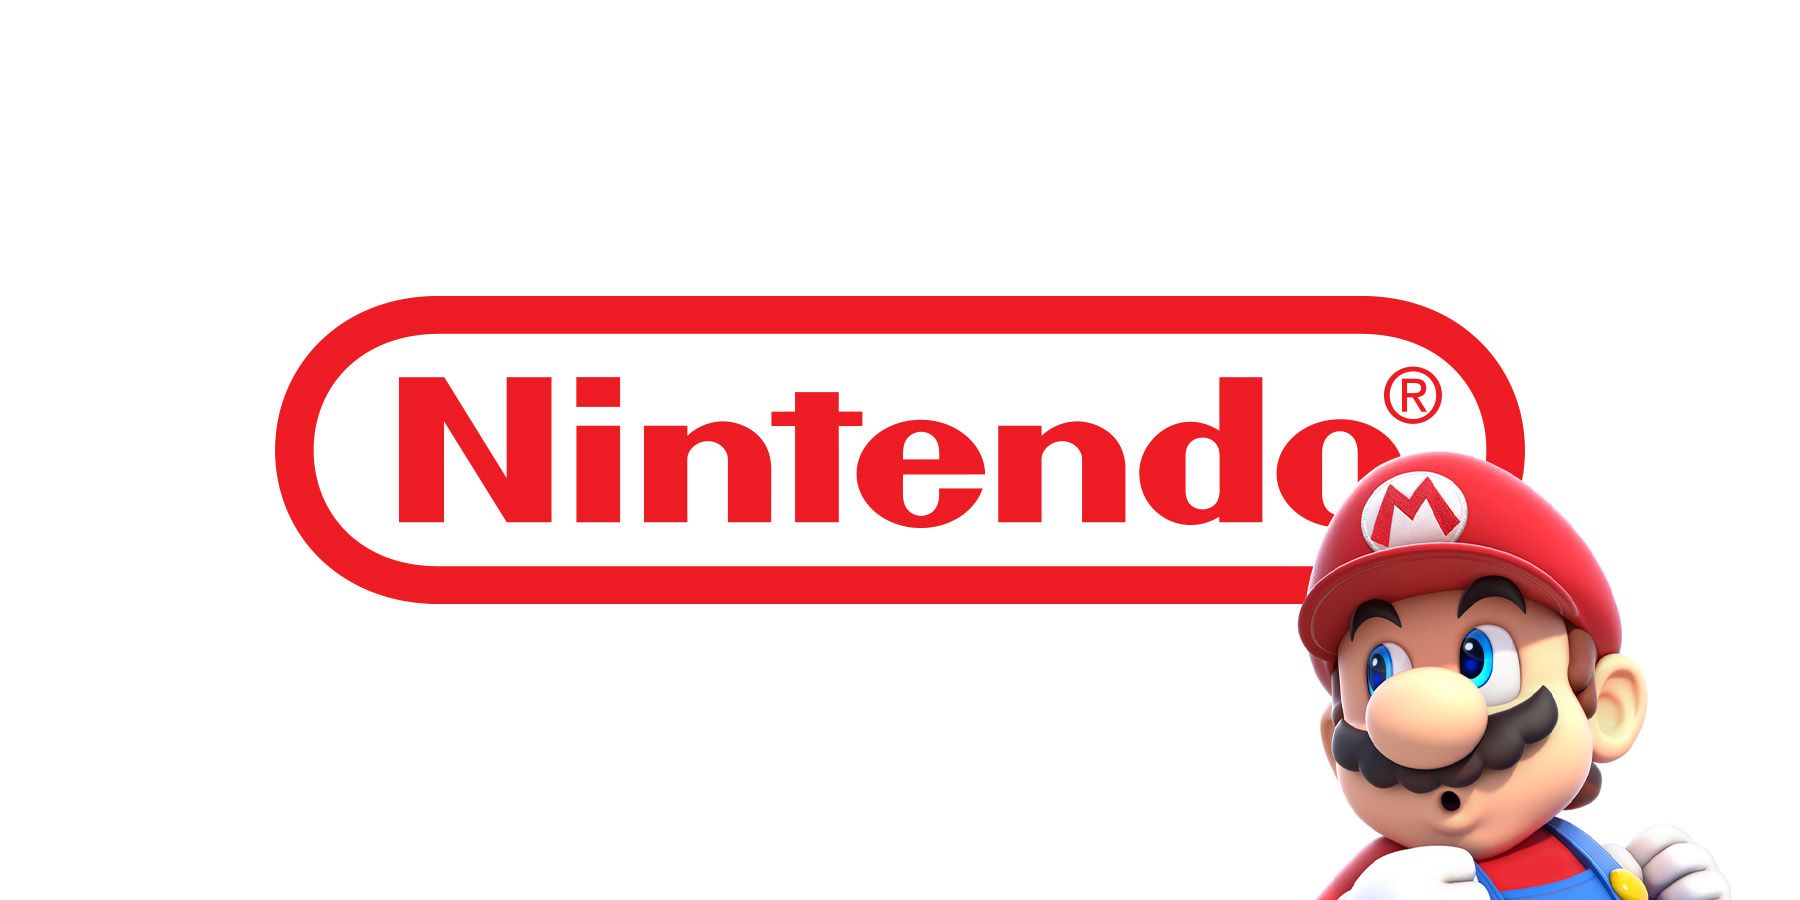 Super Mario making surprised face while looking at red Nintendo logo on white background